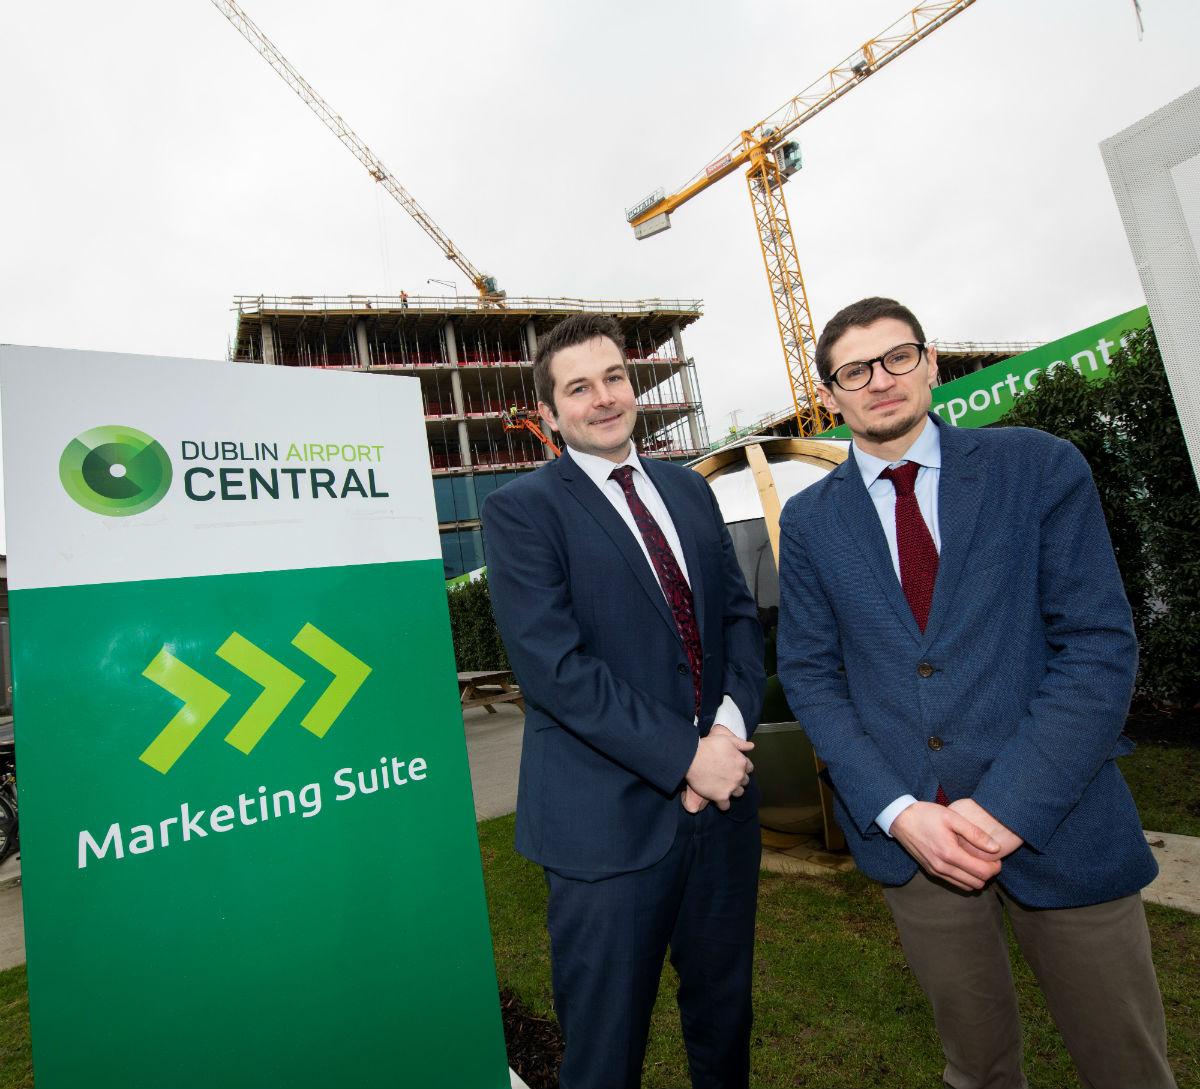   Dublin Airport Central and DCU Brexit Institute Announce Partnership